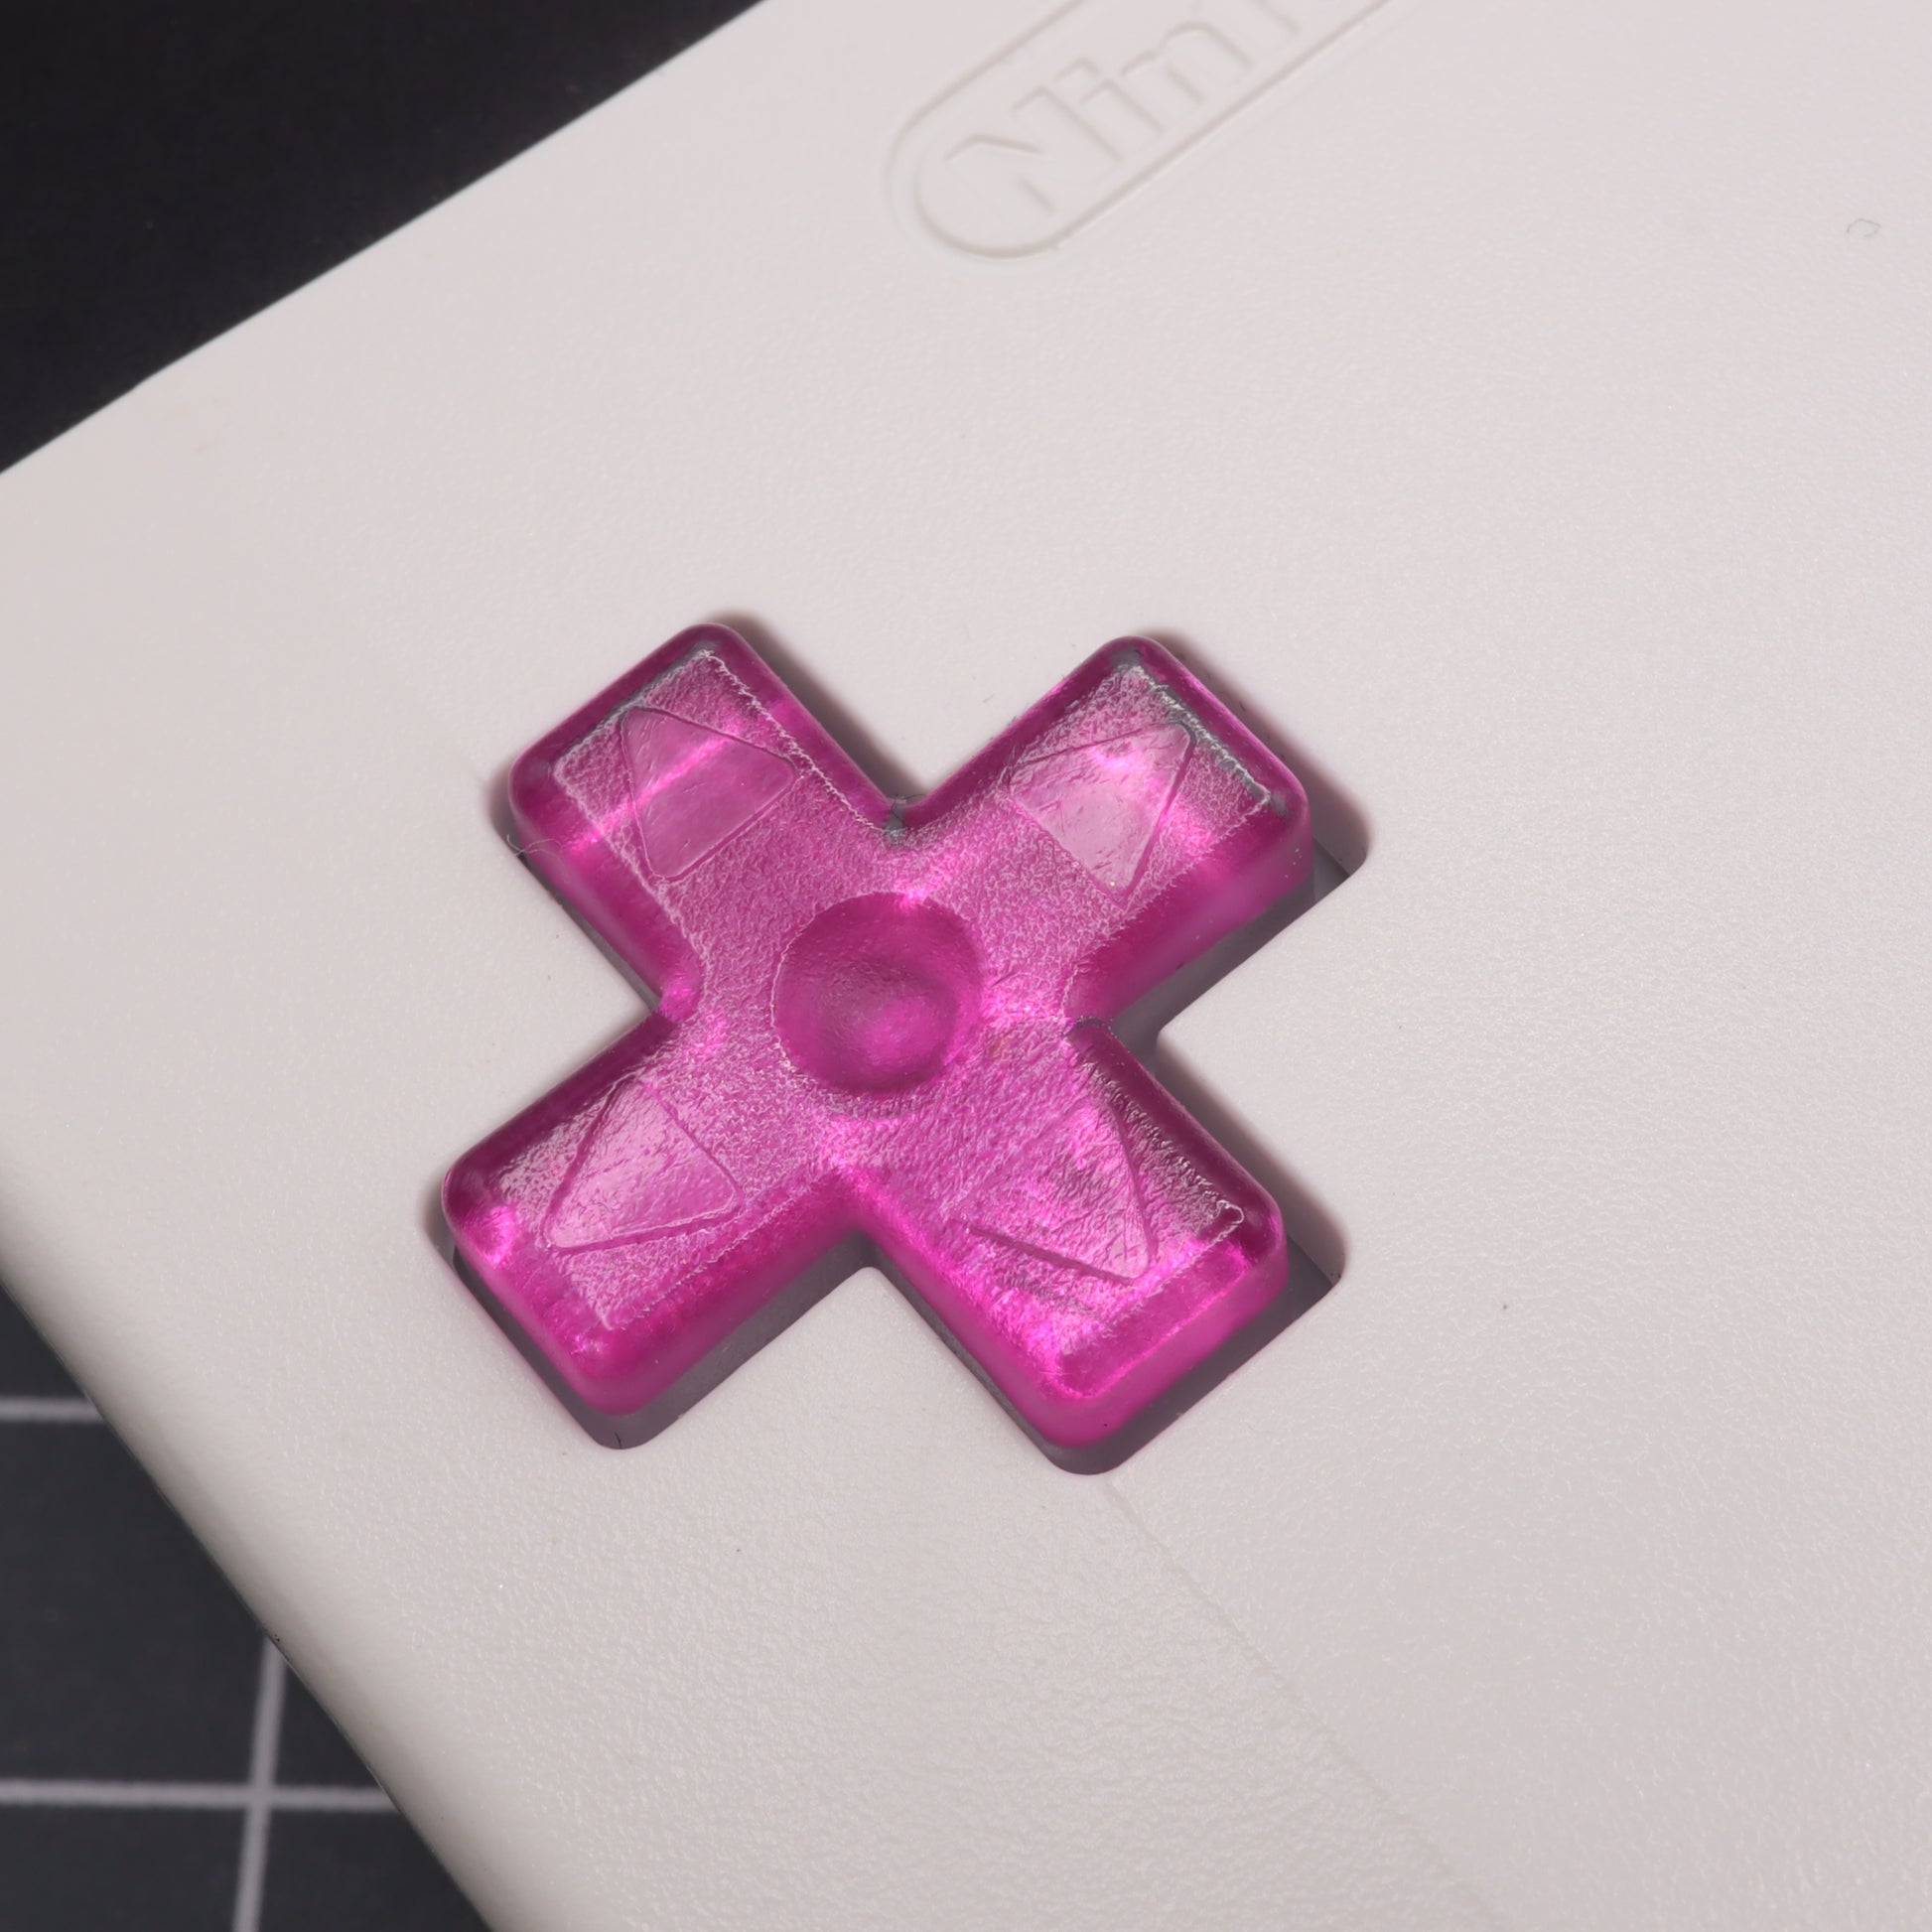 Game Boy Color custom resin dpad by lab fifteen co chrome pink colour inside white shell